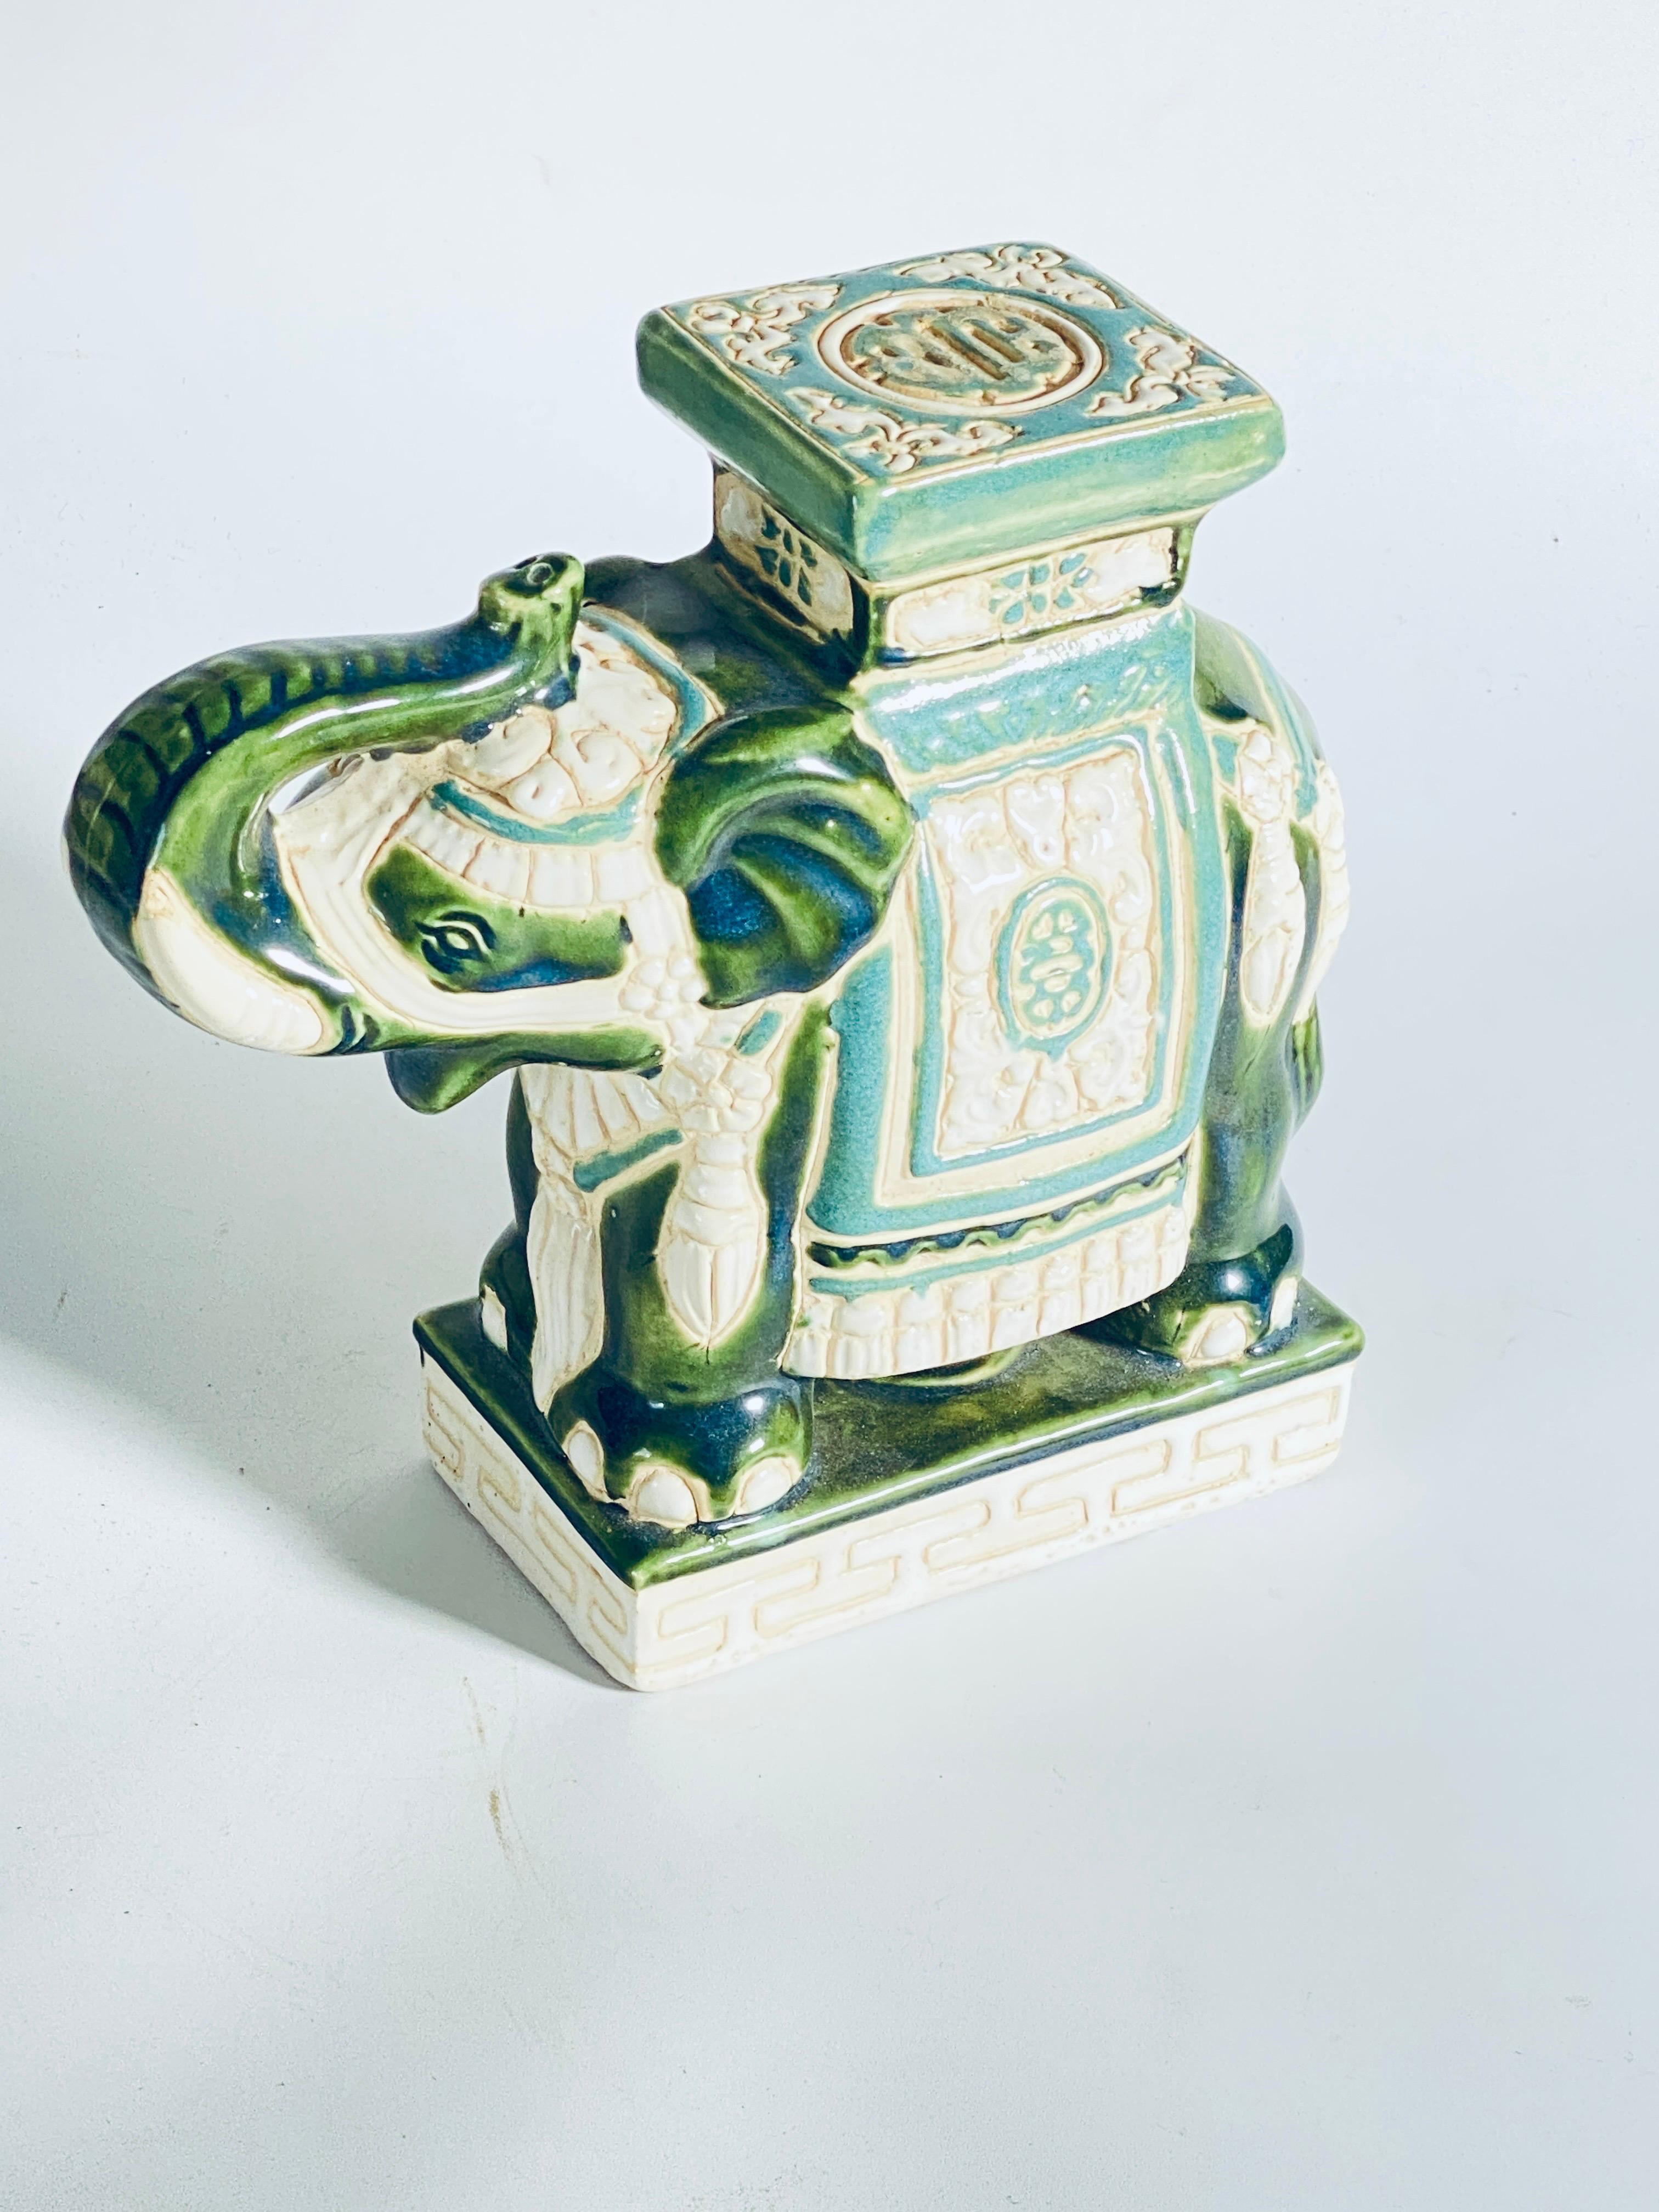 Mid-20th century glazed ceramic elephant flower plant holder.
Handmade of ceramic. Nice addition to your home, inside or Outside. This is in good condition, green color.